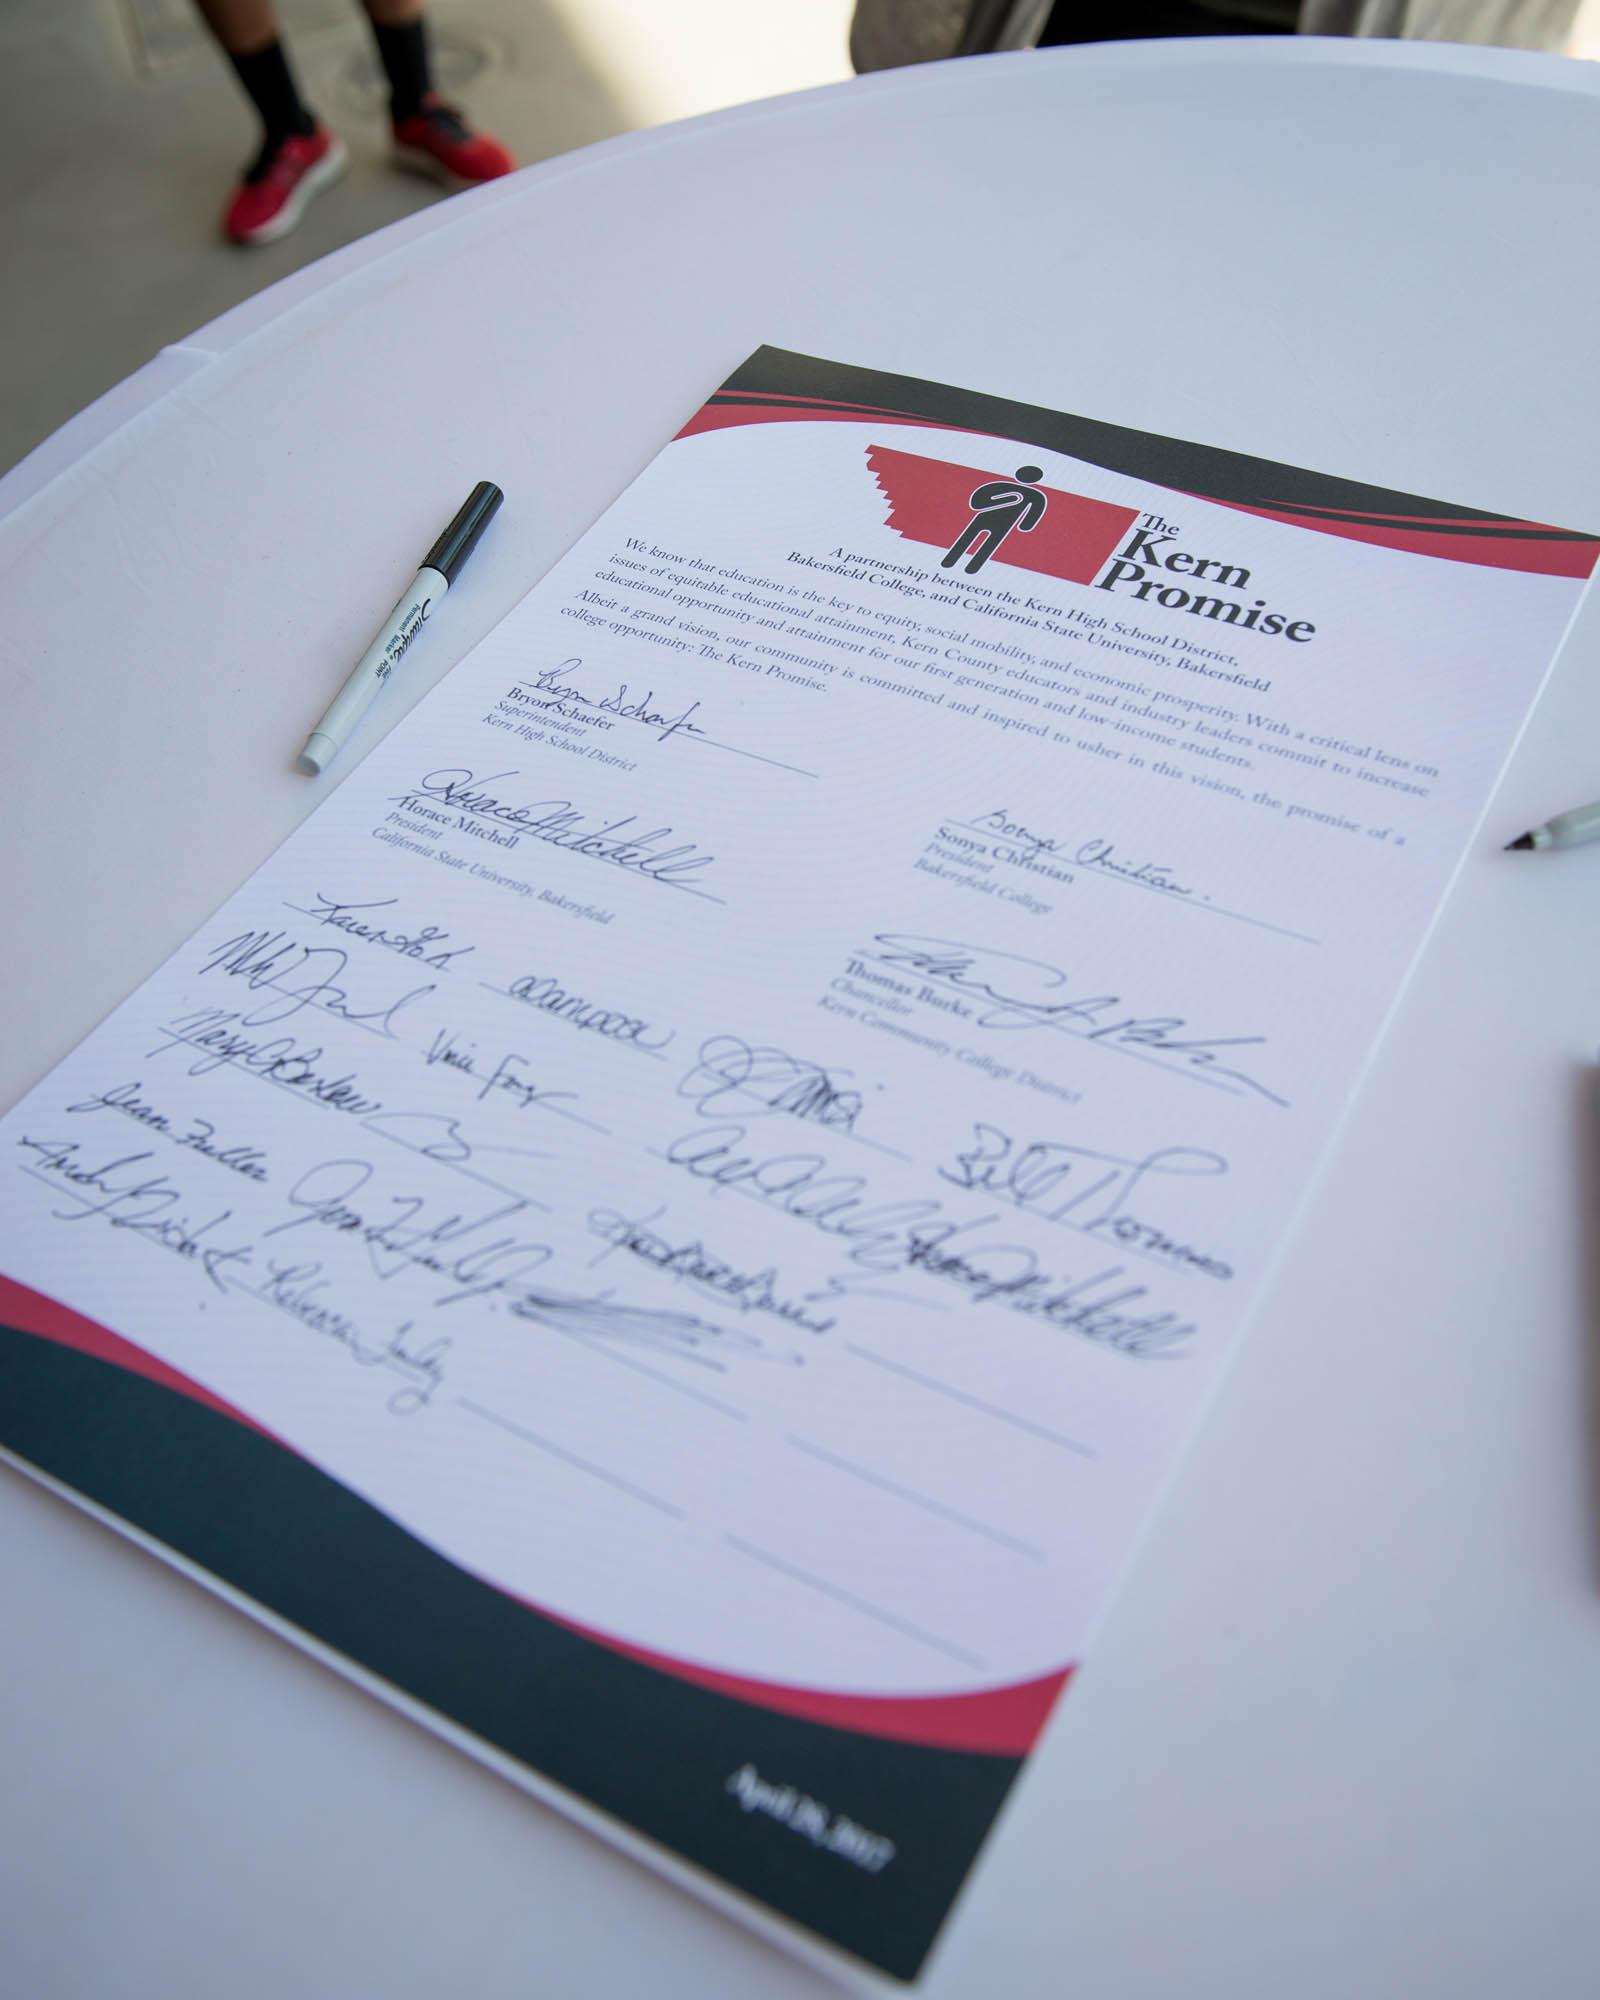 Picture of signed Kern Promise document